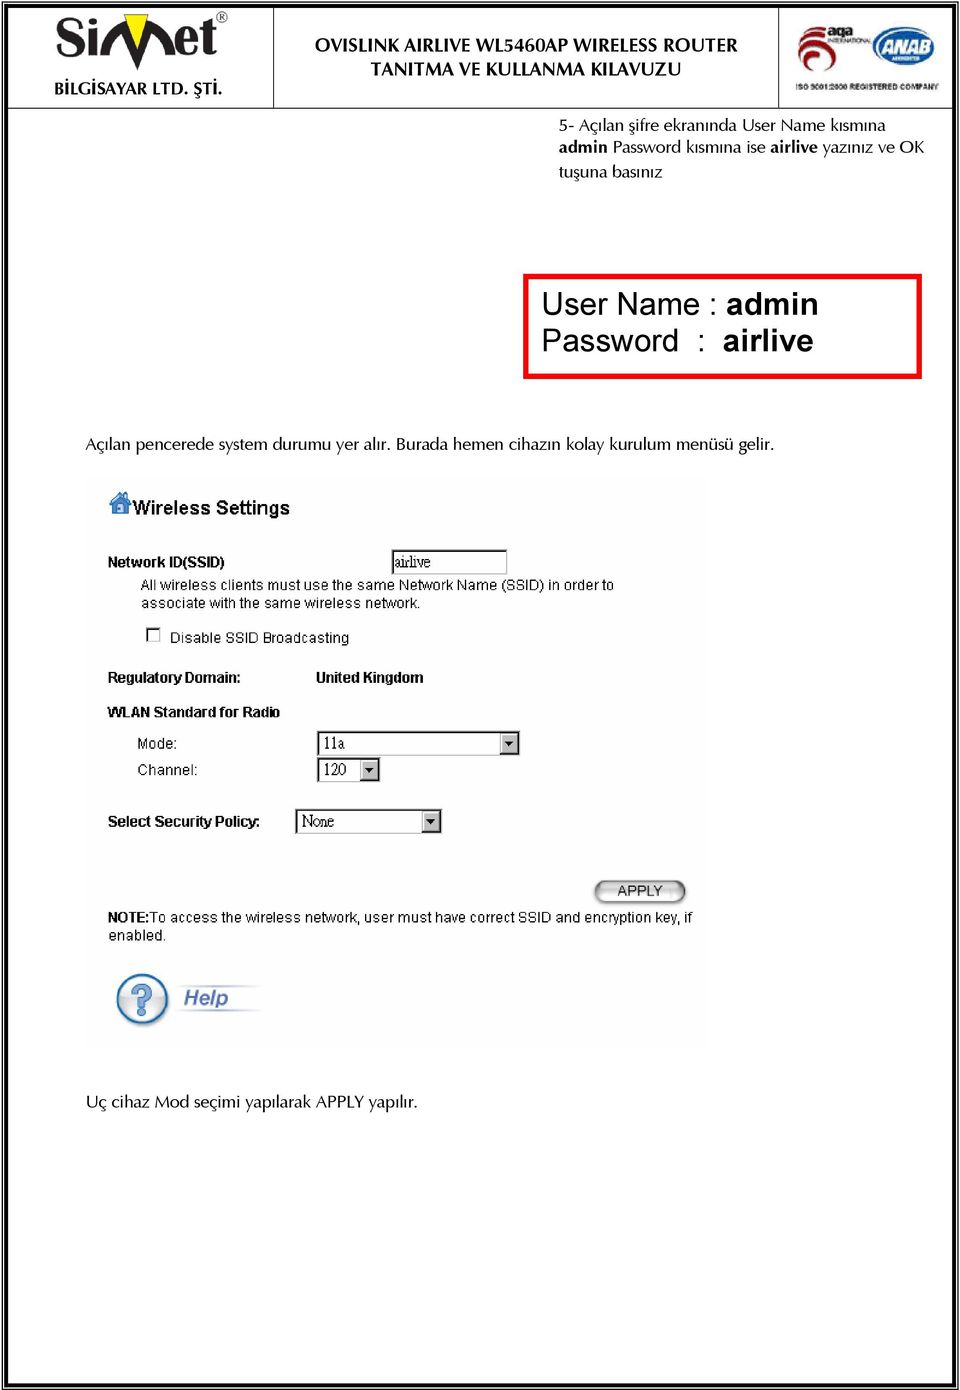 You may change them in Password User Configuration Name page : admin after entering the system.